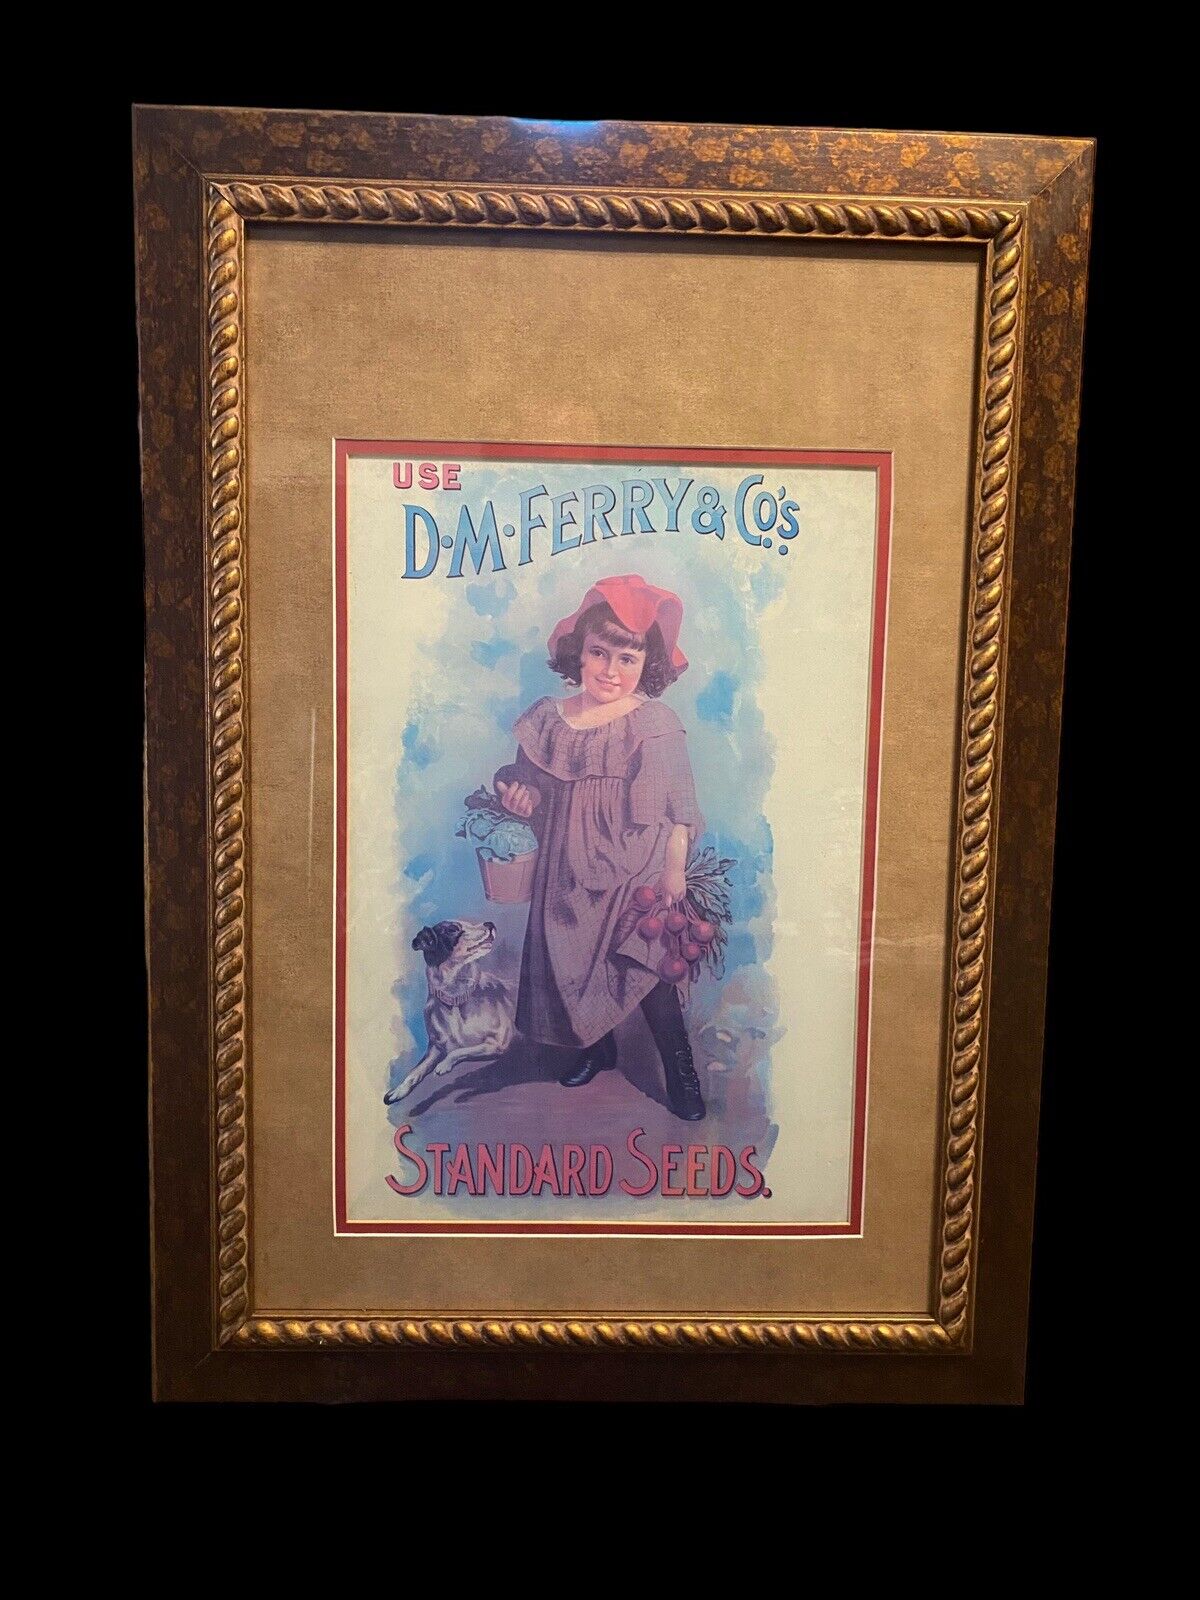 D.M. FERRY & CO. STANDARD SEEDS ADVERTISING POSTER FRAMED DISPLAY 33X23